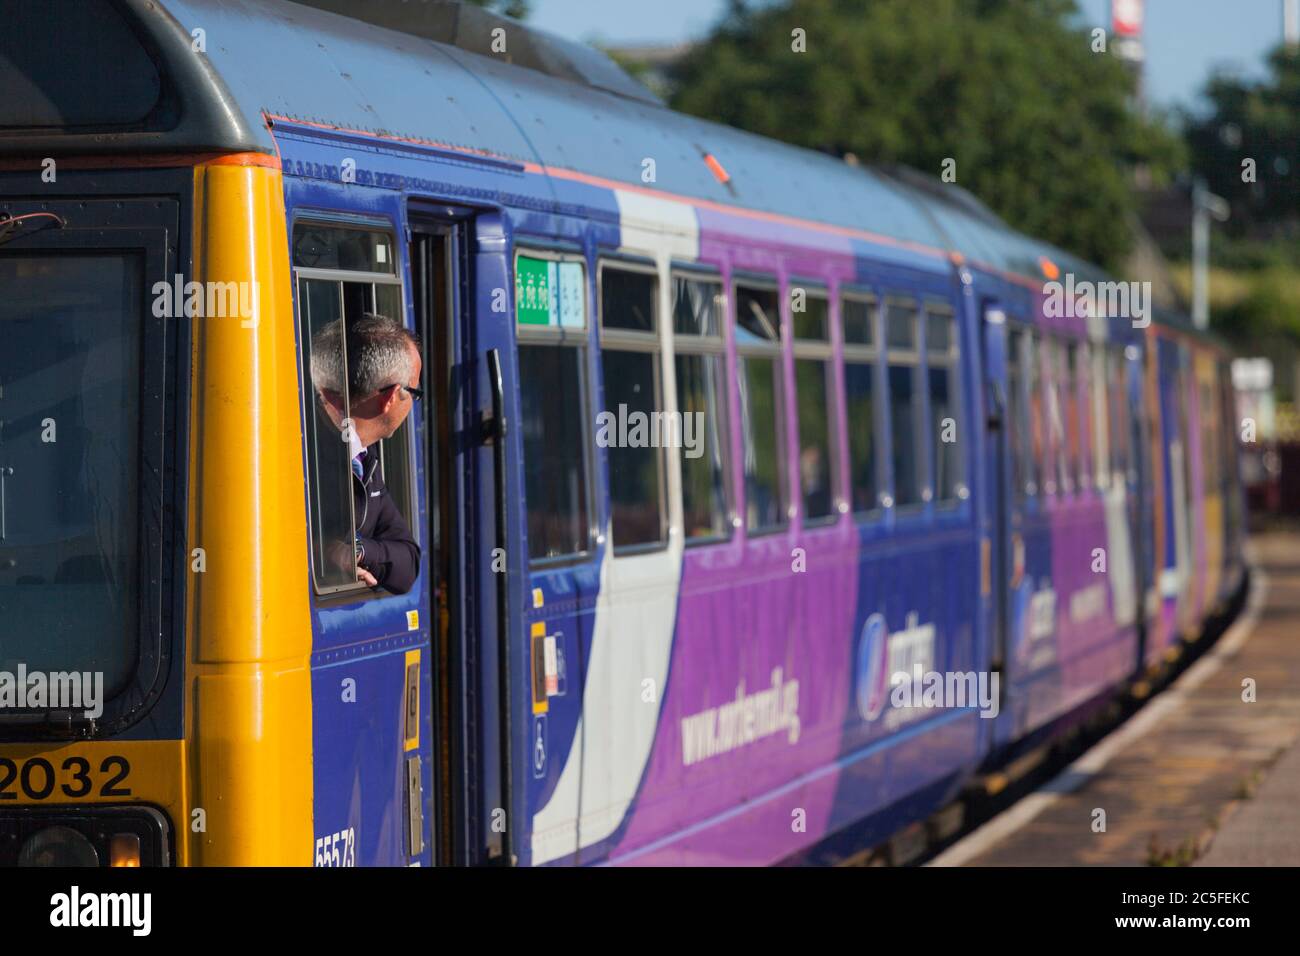 Northern Rail train driver looking out of a Northern Rail class 142 pacer train at Blackpool south railway station Stock Photo